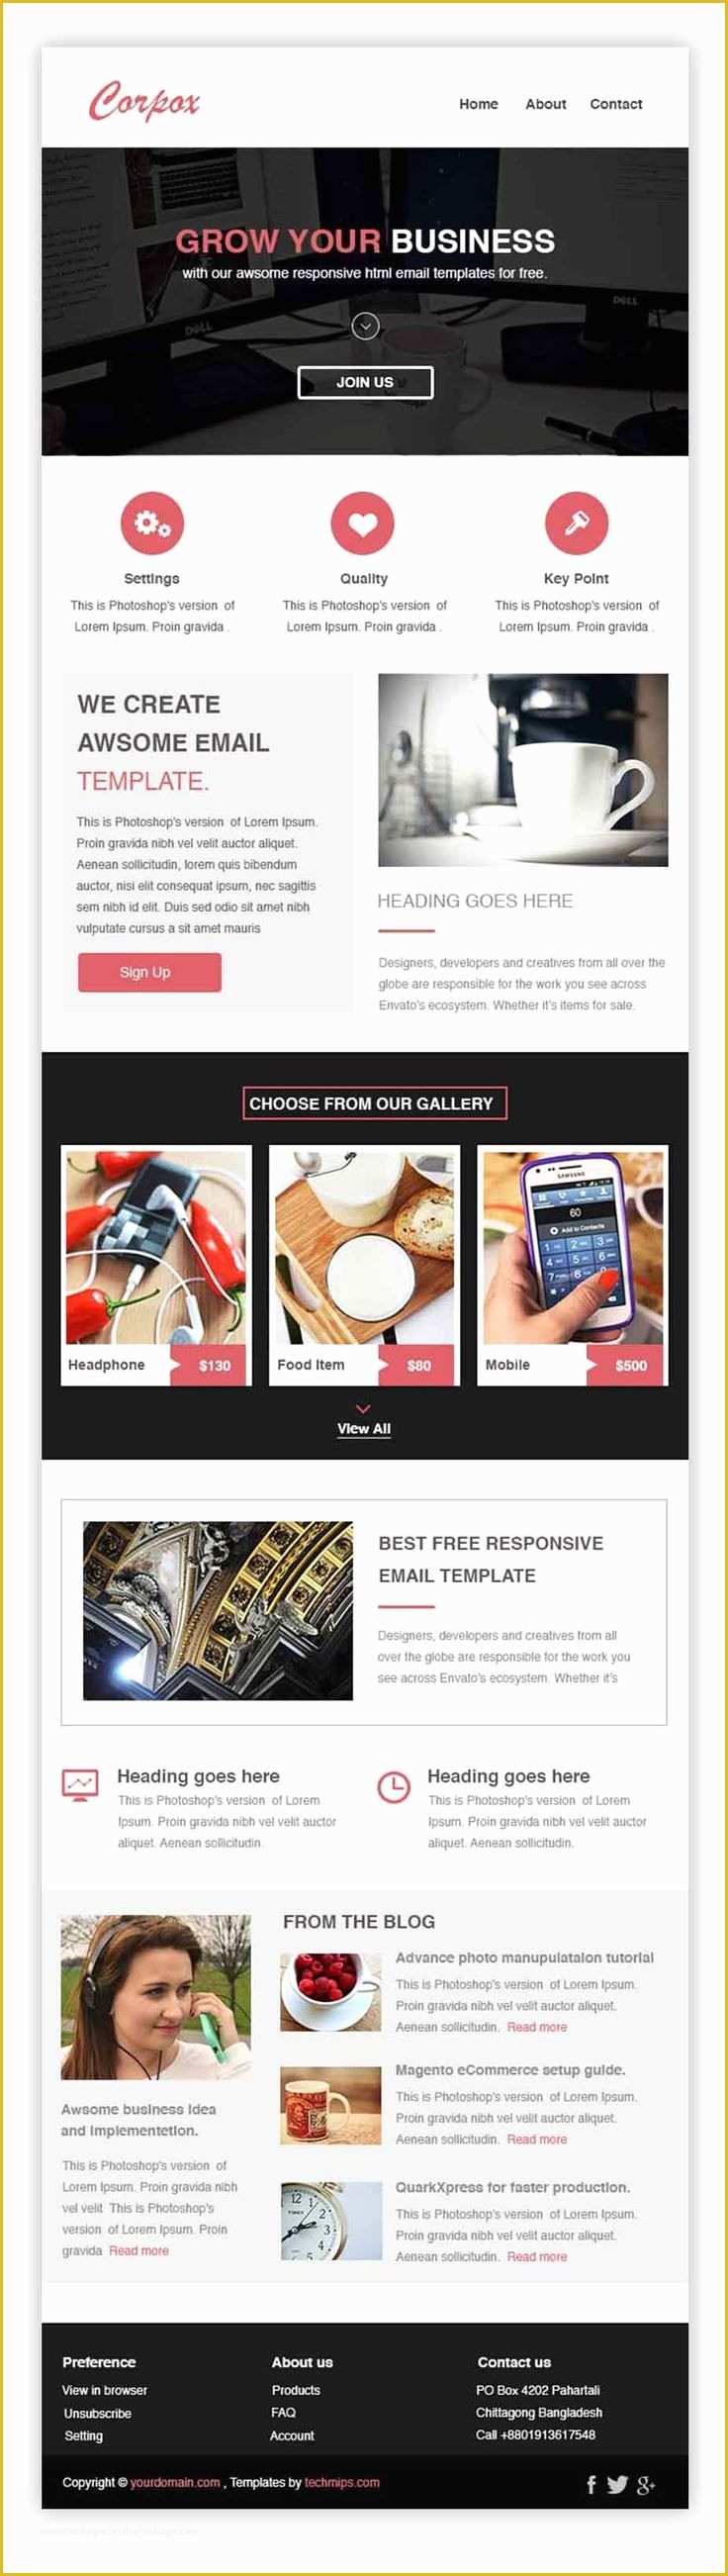 Newsletter Template Responsive Free Of Corpox is Our Second Free Responsive HTML Email Newsletter